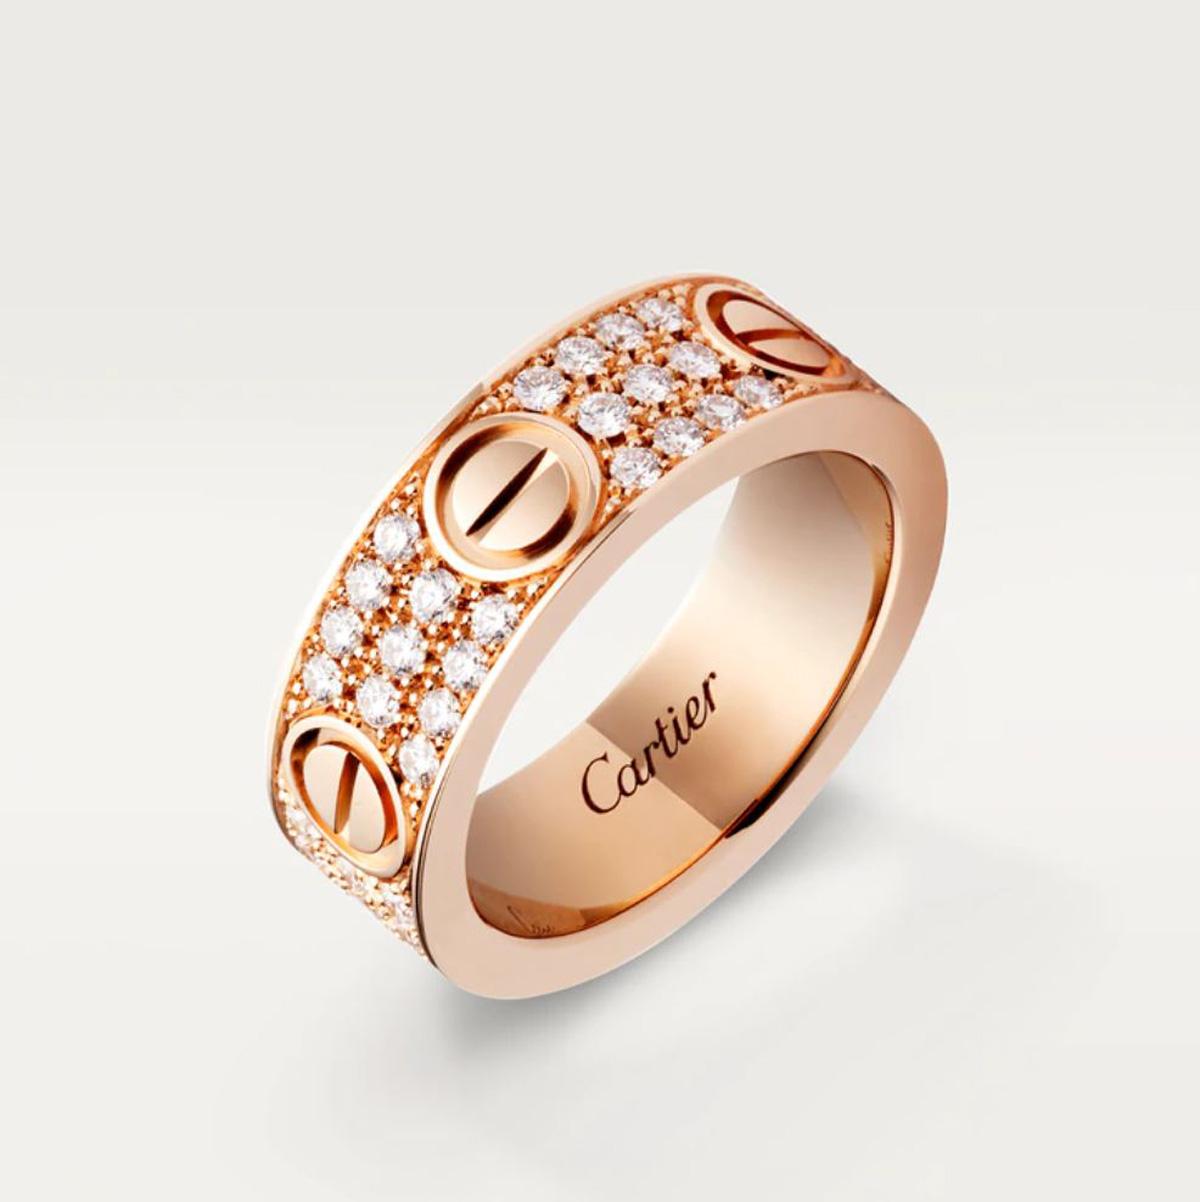 cartier uk ring size